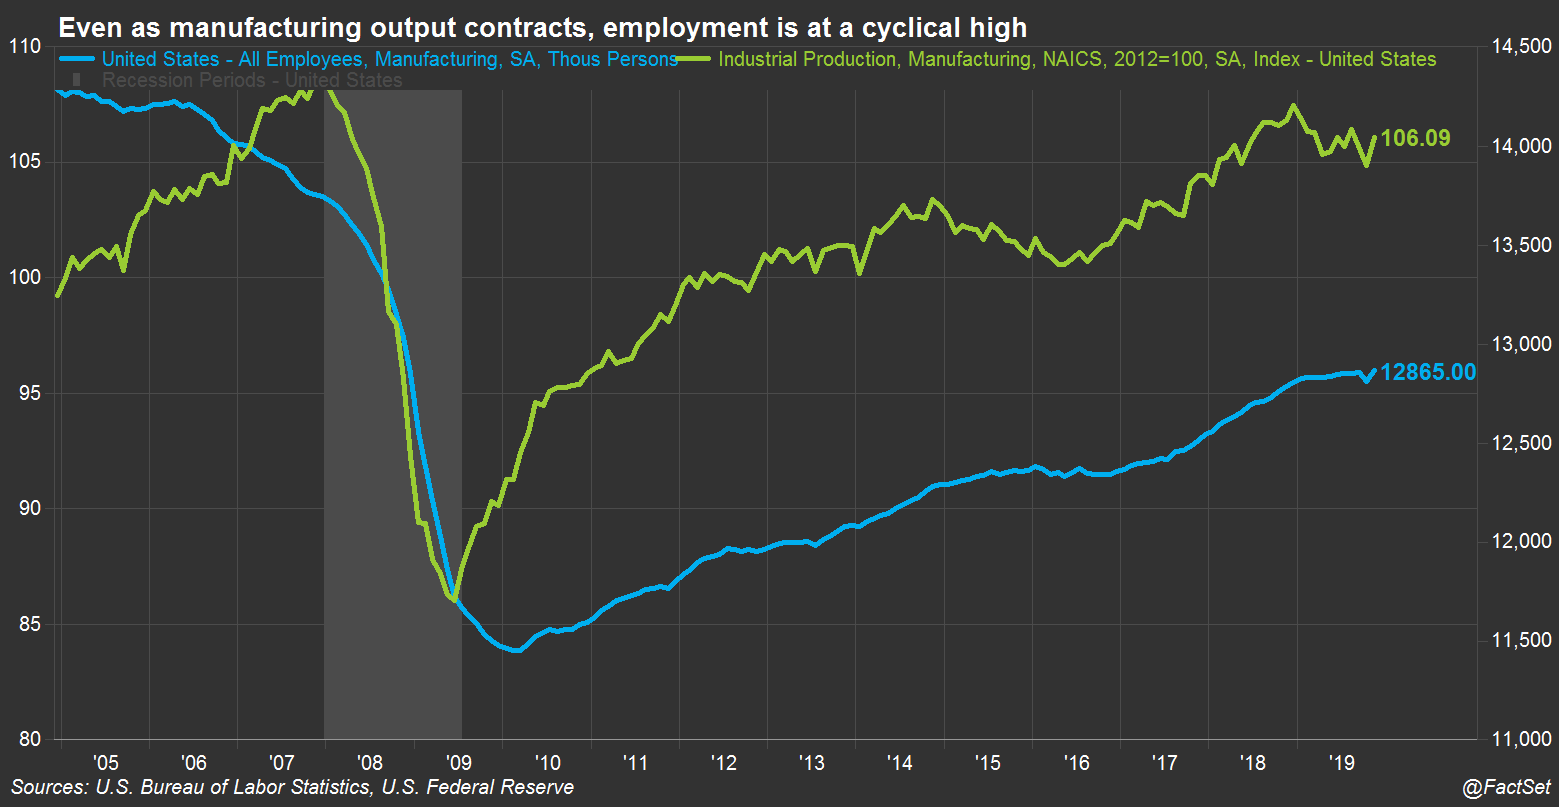 Even as mfg output contracts emp at a cyclical high